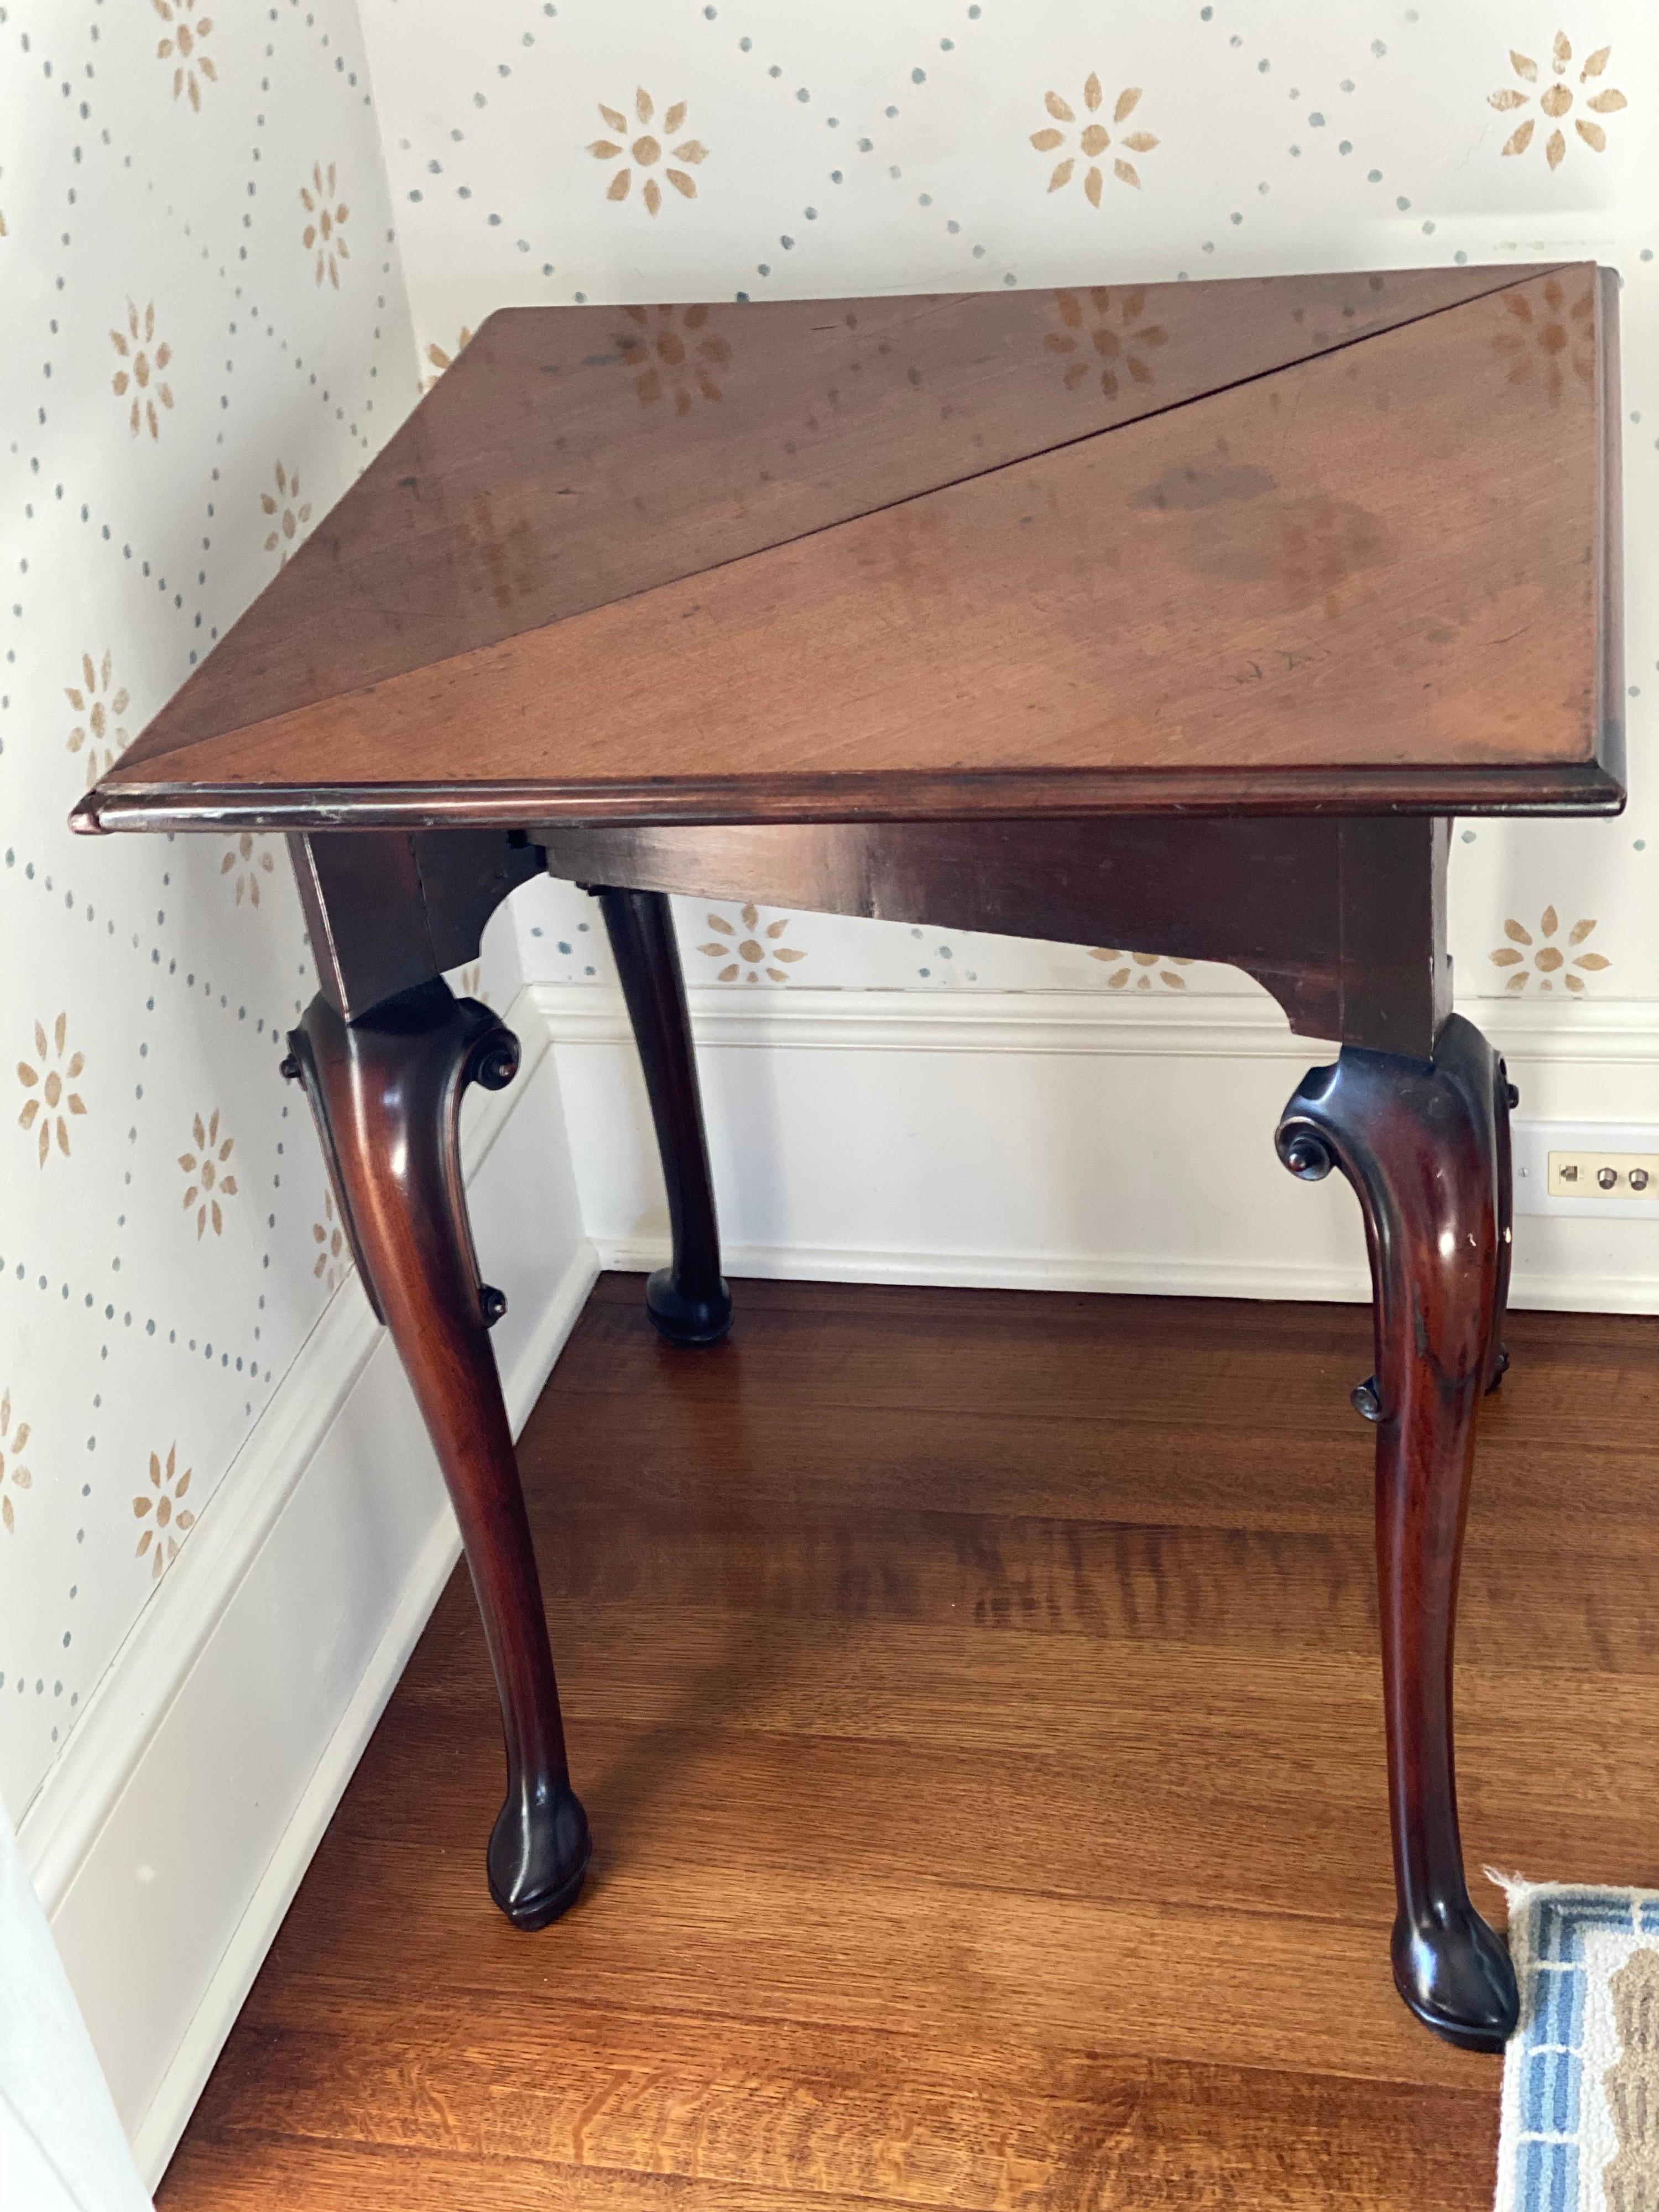 18th century Irish George II mahogany corner drop-leaf table,
circa 1750.
The triangular top with a triangular hinged leaf supported on cabriole legs with C-scrolled brackets and ending in pointed pad feet.
Measures: Depth open 34